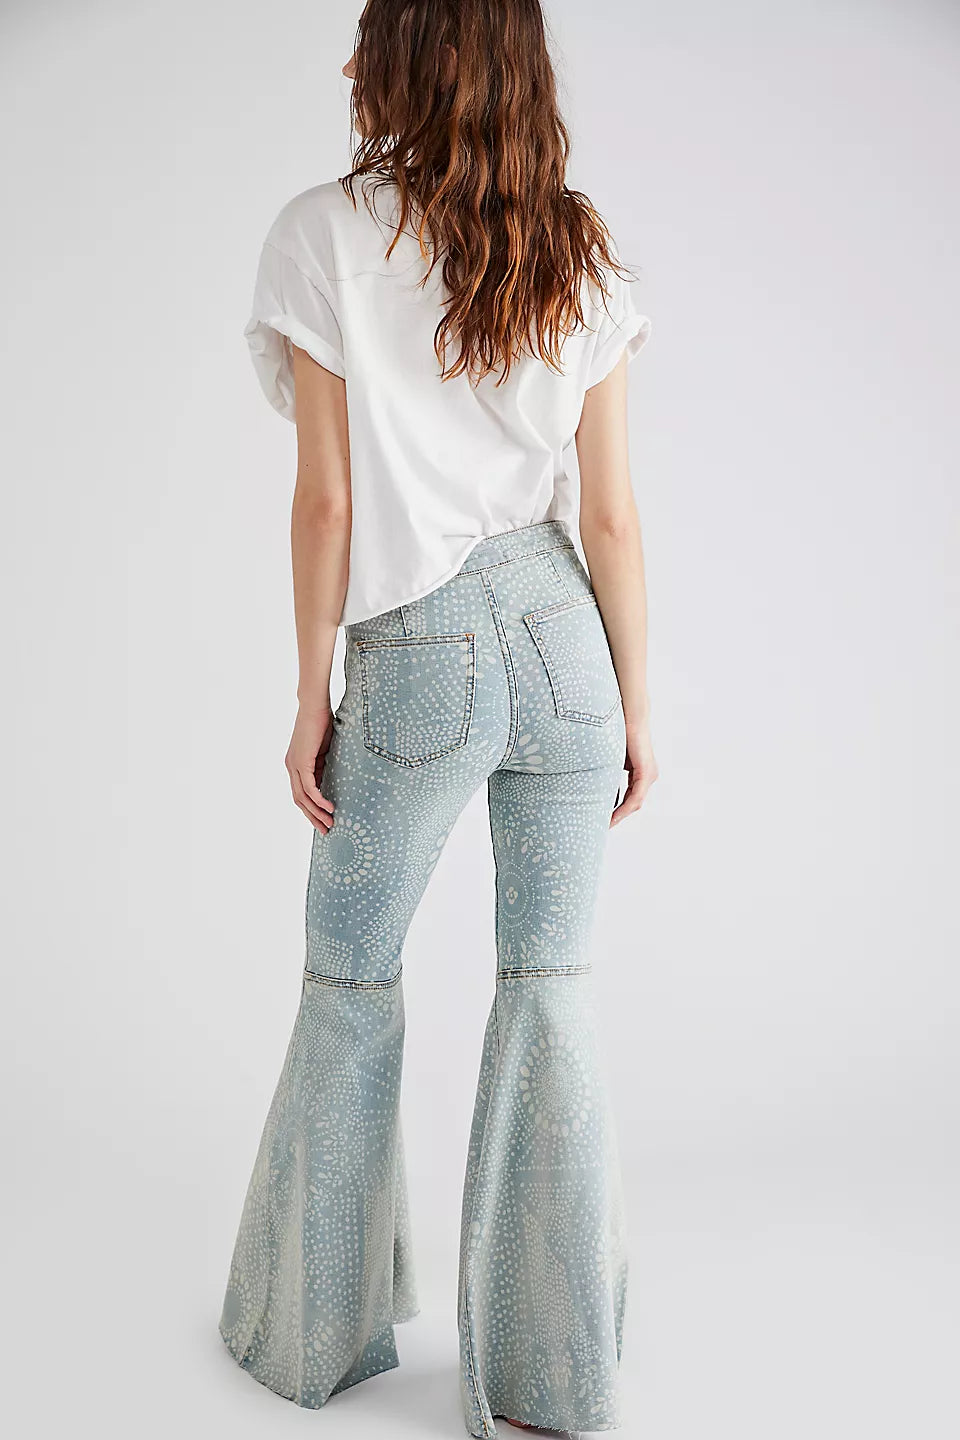 Free People We The Free Just Float On Flare Jeans Jericho Blue 25